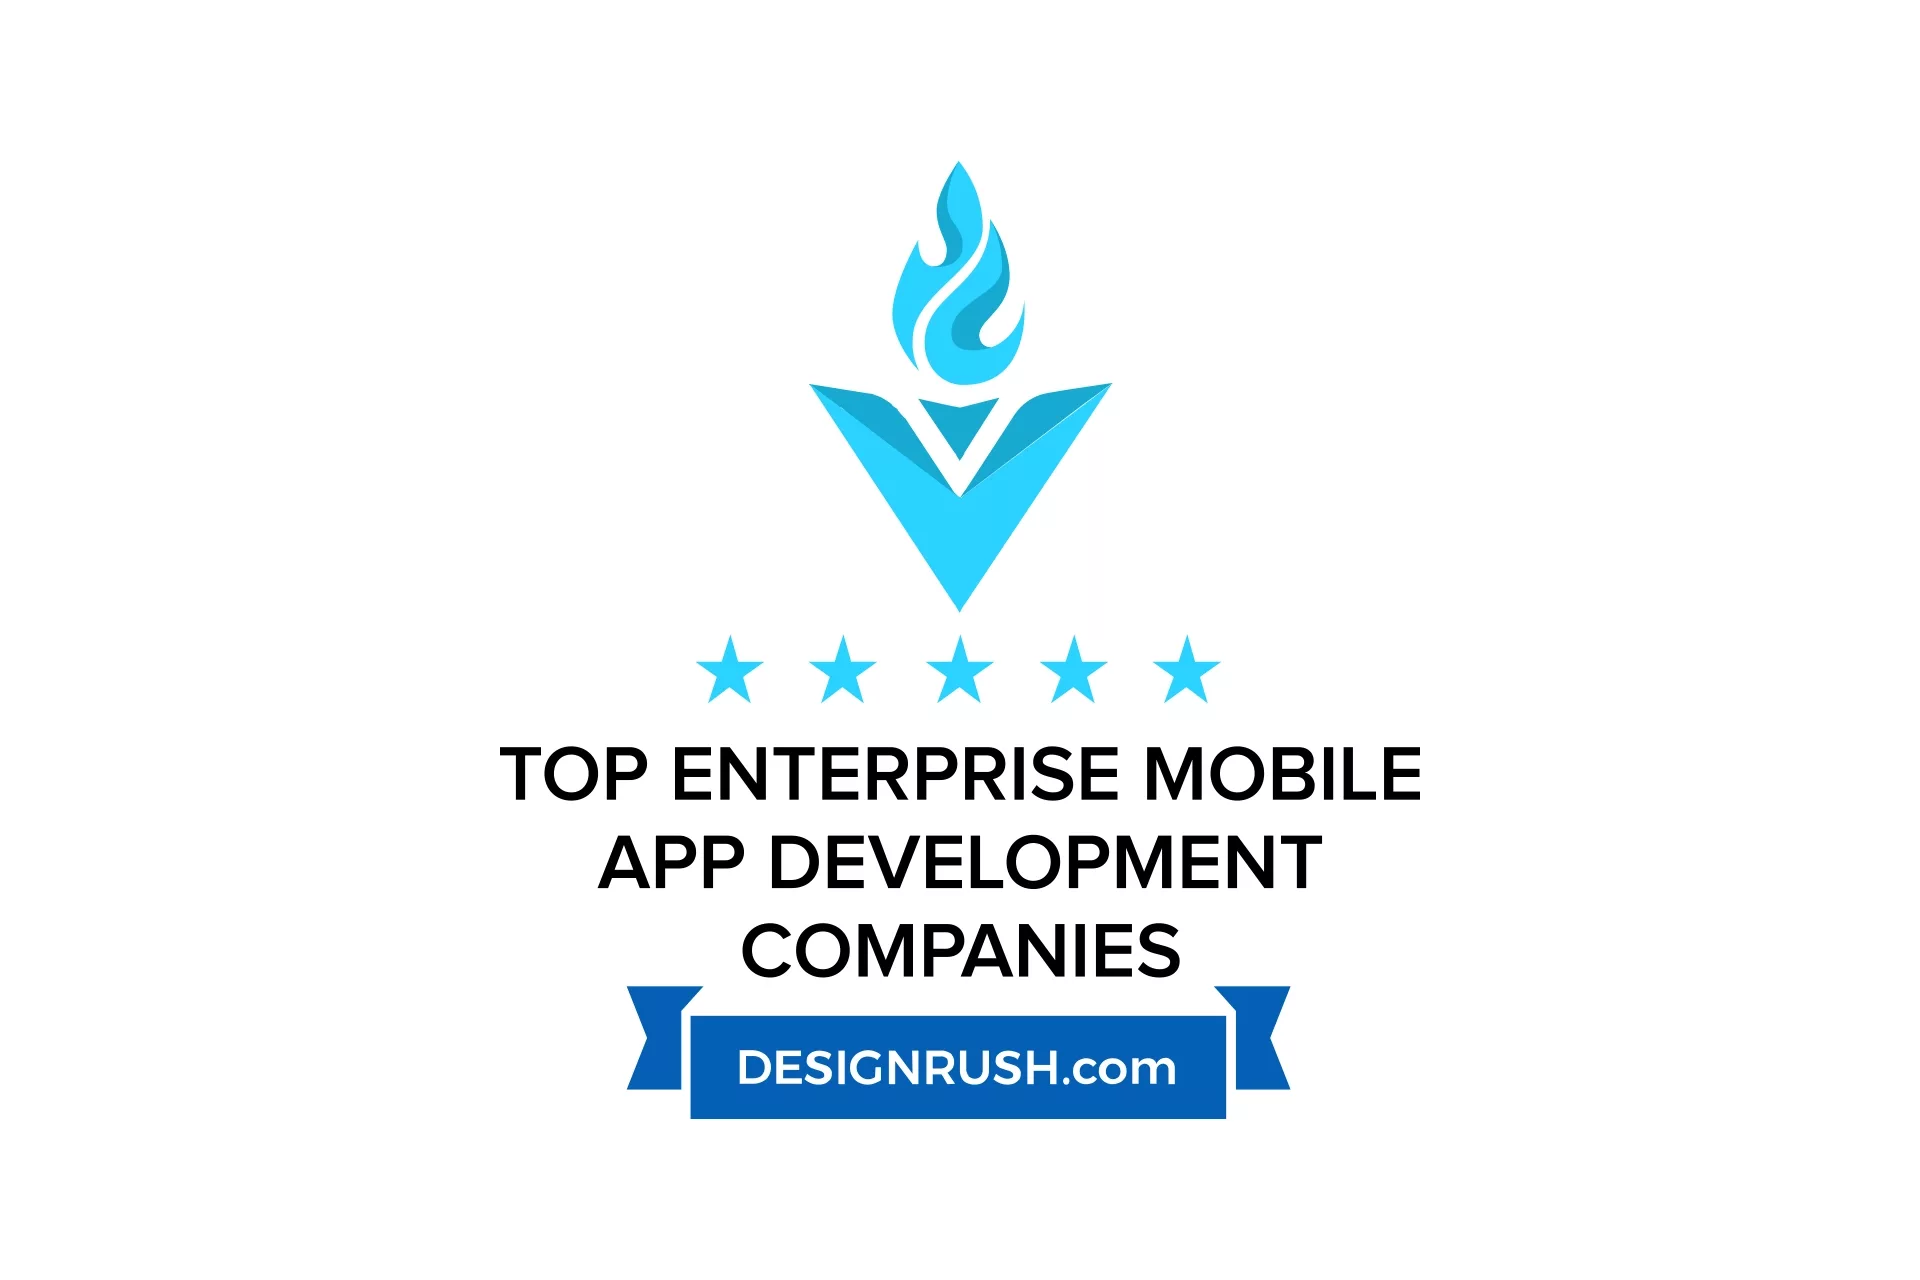 We are honored to have been featured on ﻿DesignRush's top Enterprise Mobile App Development Companies of 2022.